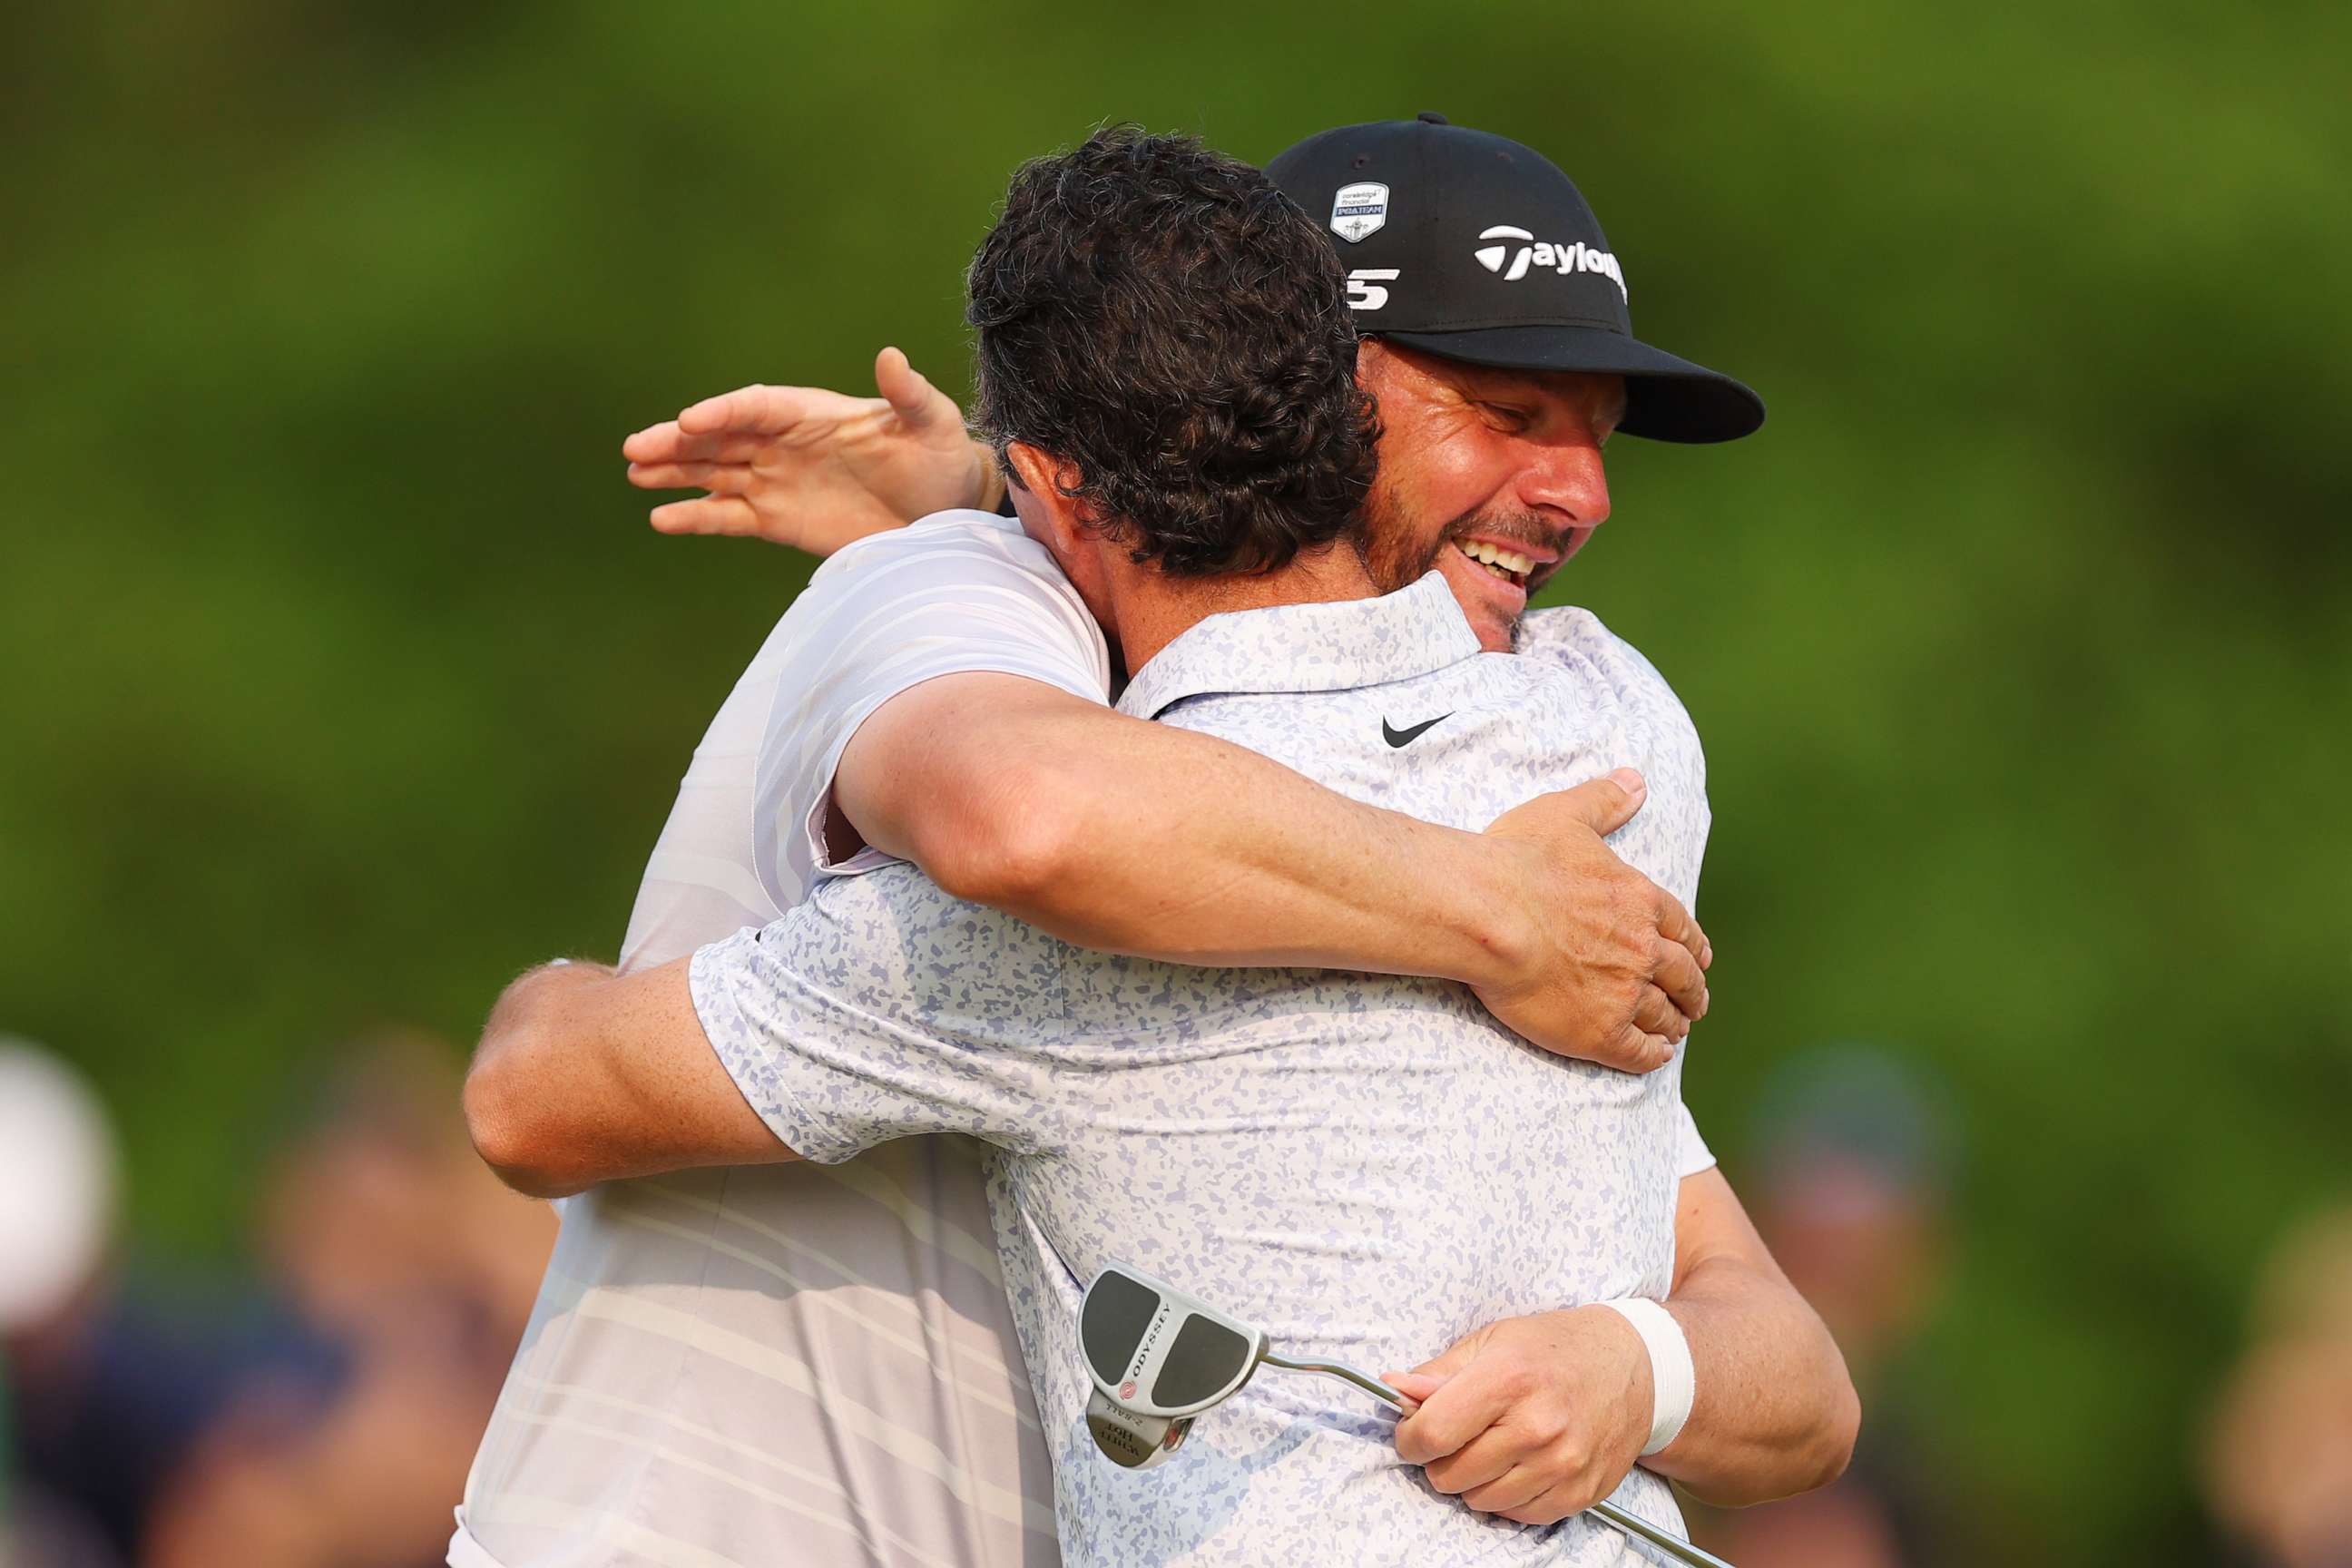 PHOTO: Michael Block, PGA of America Club Professional, and Rory McIlroy congratulate each other on the 18th green during the final round of the 2023 PGA Championship at Oak Hill Country Club on May 21, 2023 in Rochester, N.Y.